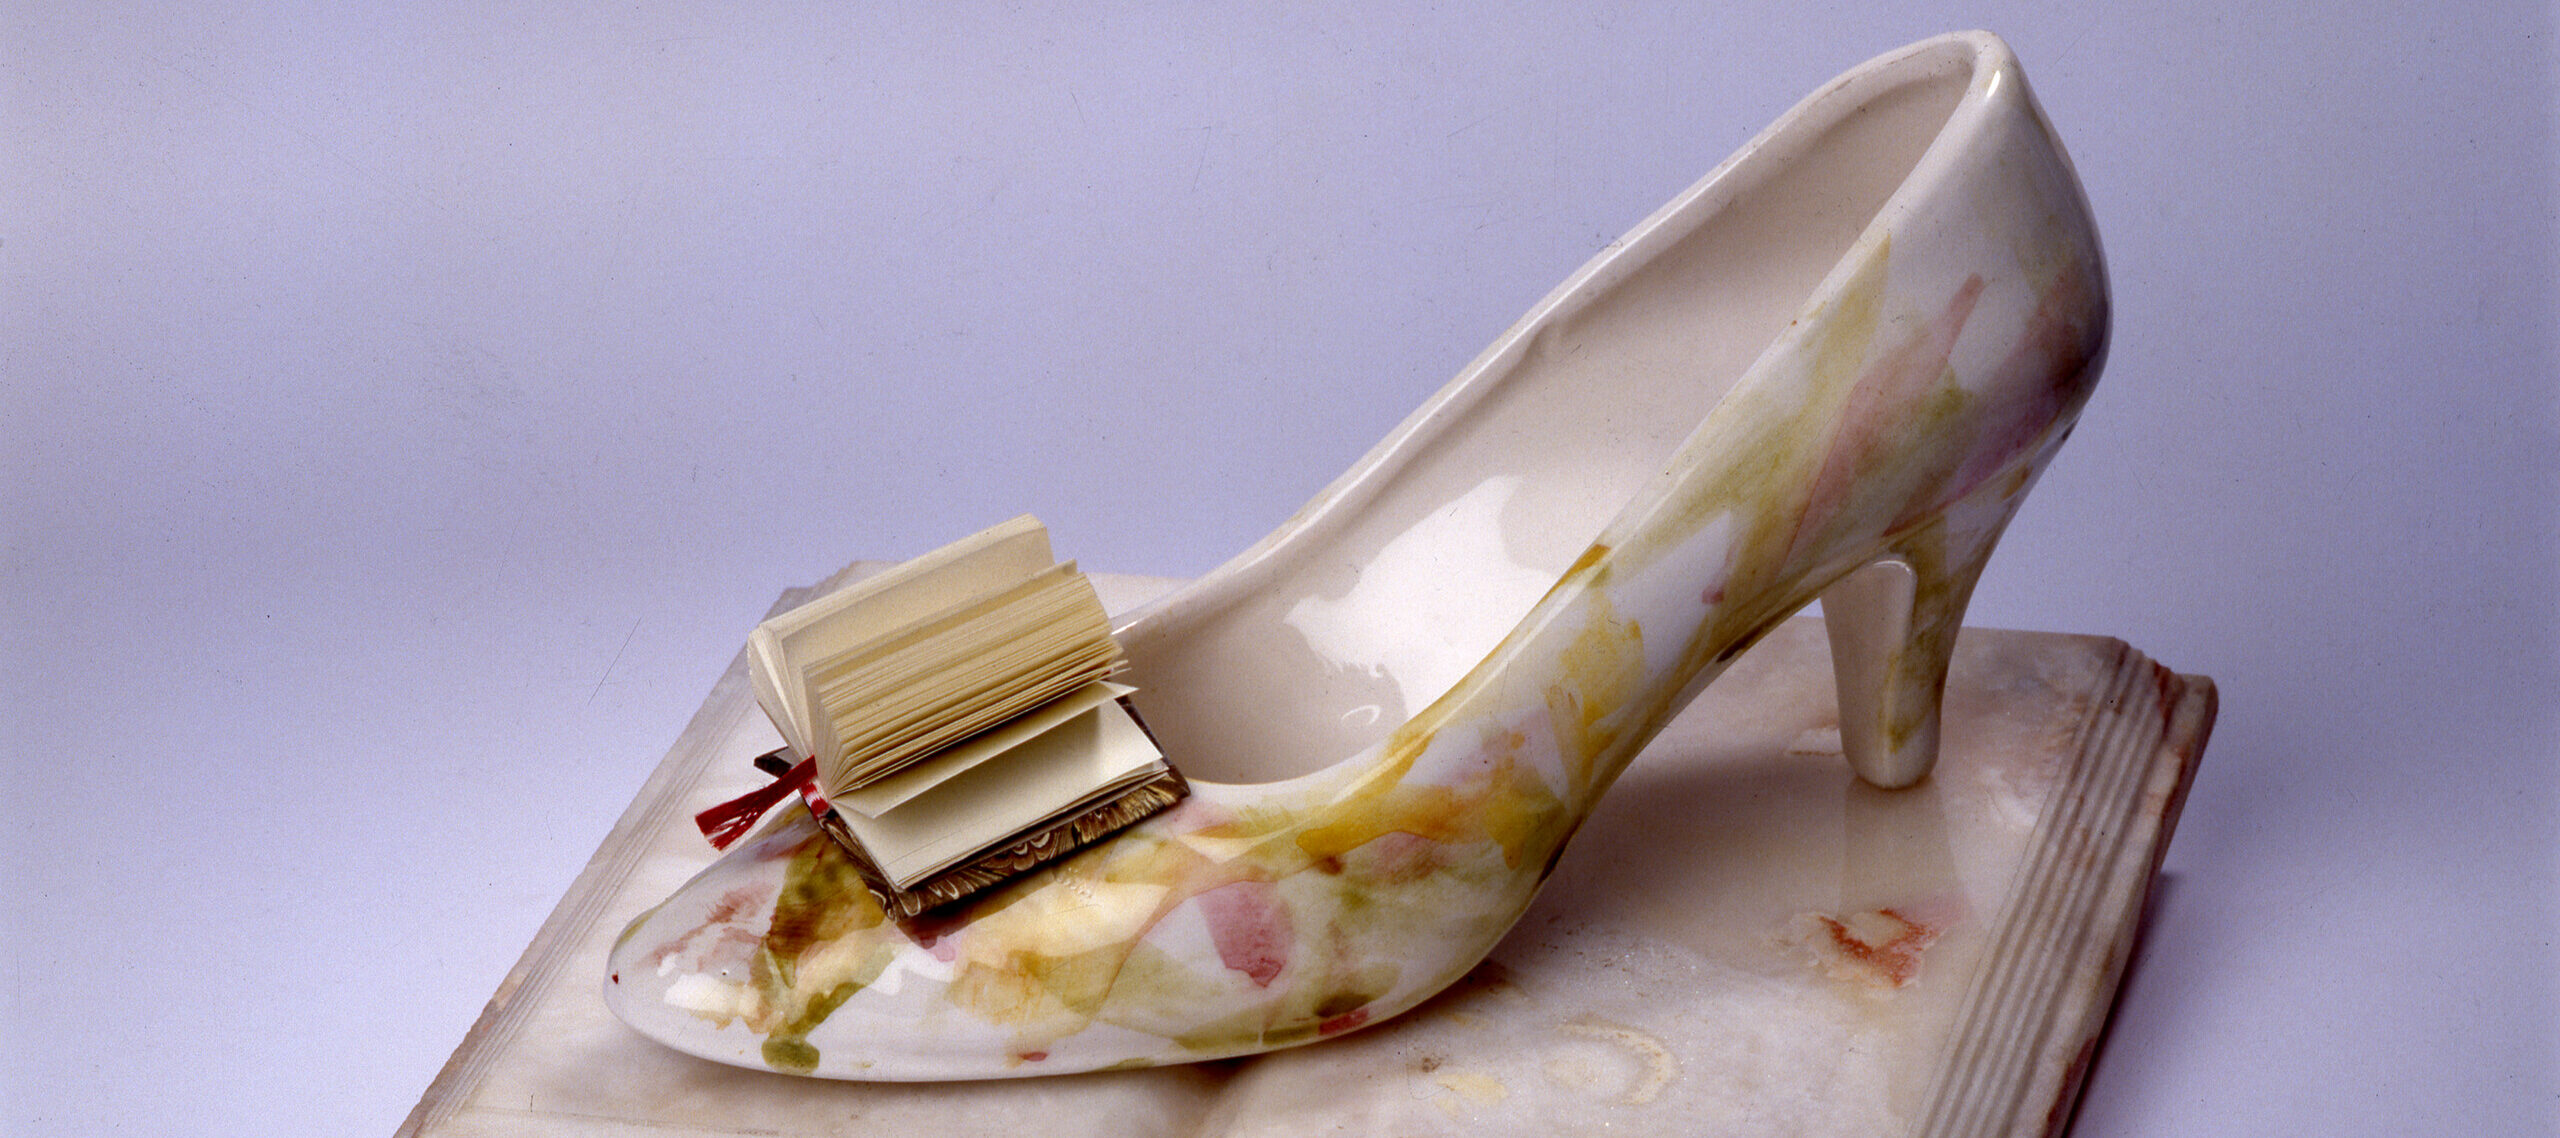 A woman's glass slipper rests on the open pages of a porcelain book. In place of a bow on the toe of the slipper is a paper book with pages fanned out.